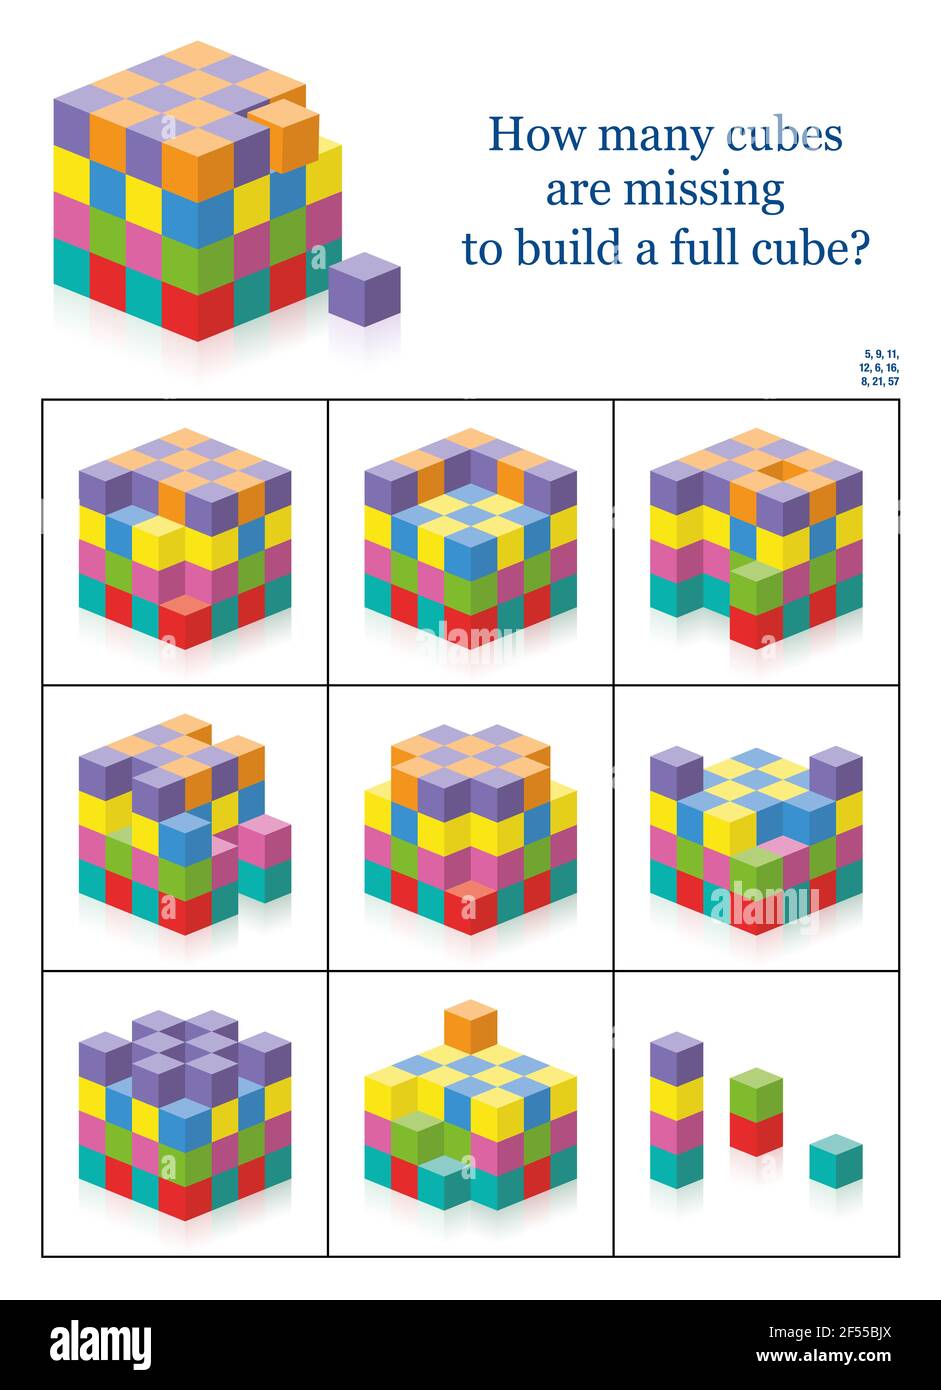 Missing cubes. How many gaps, holes, blanks are there to get a full cube? 3d spatial perception exercise. Colorful counting game with solution. Stock Photo